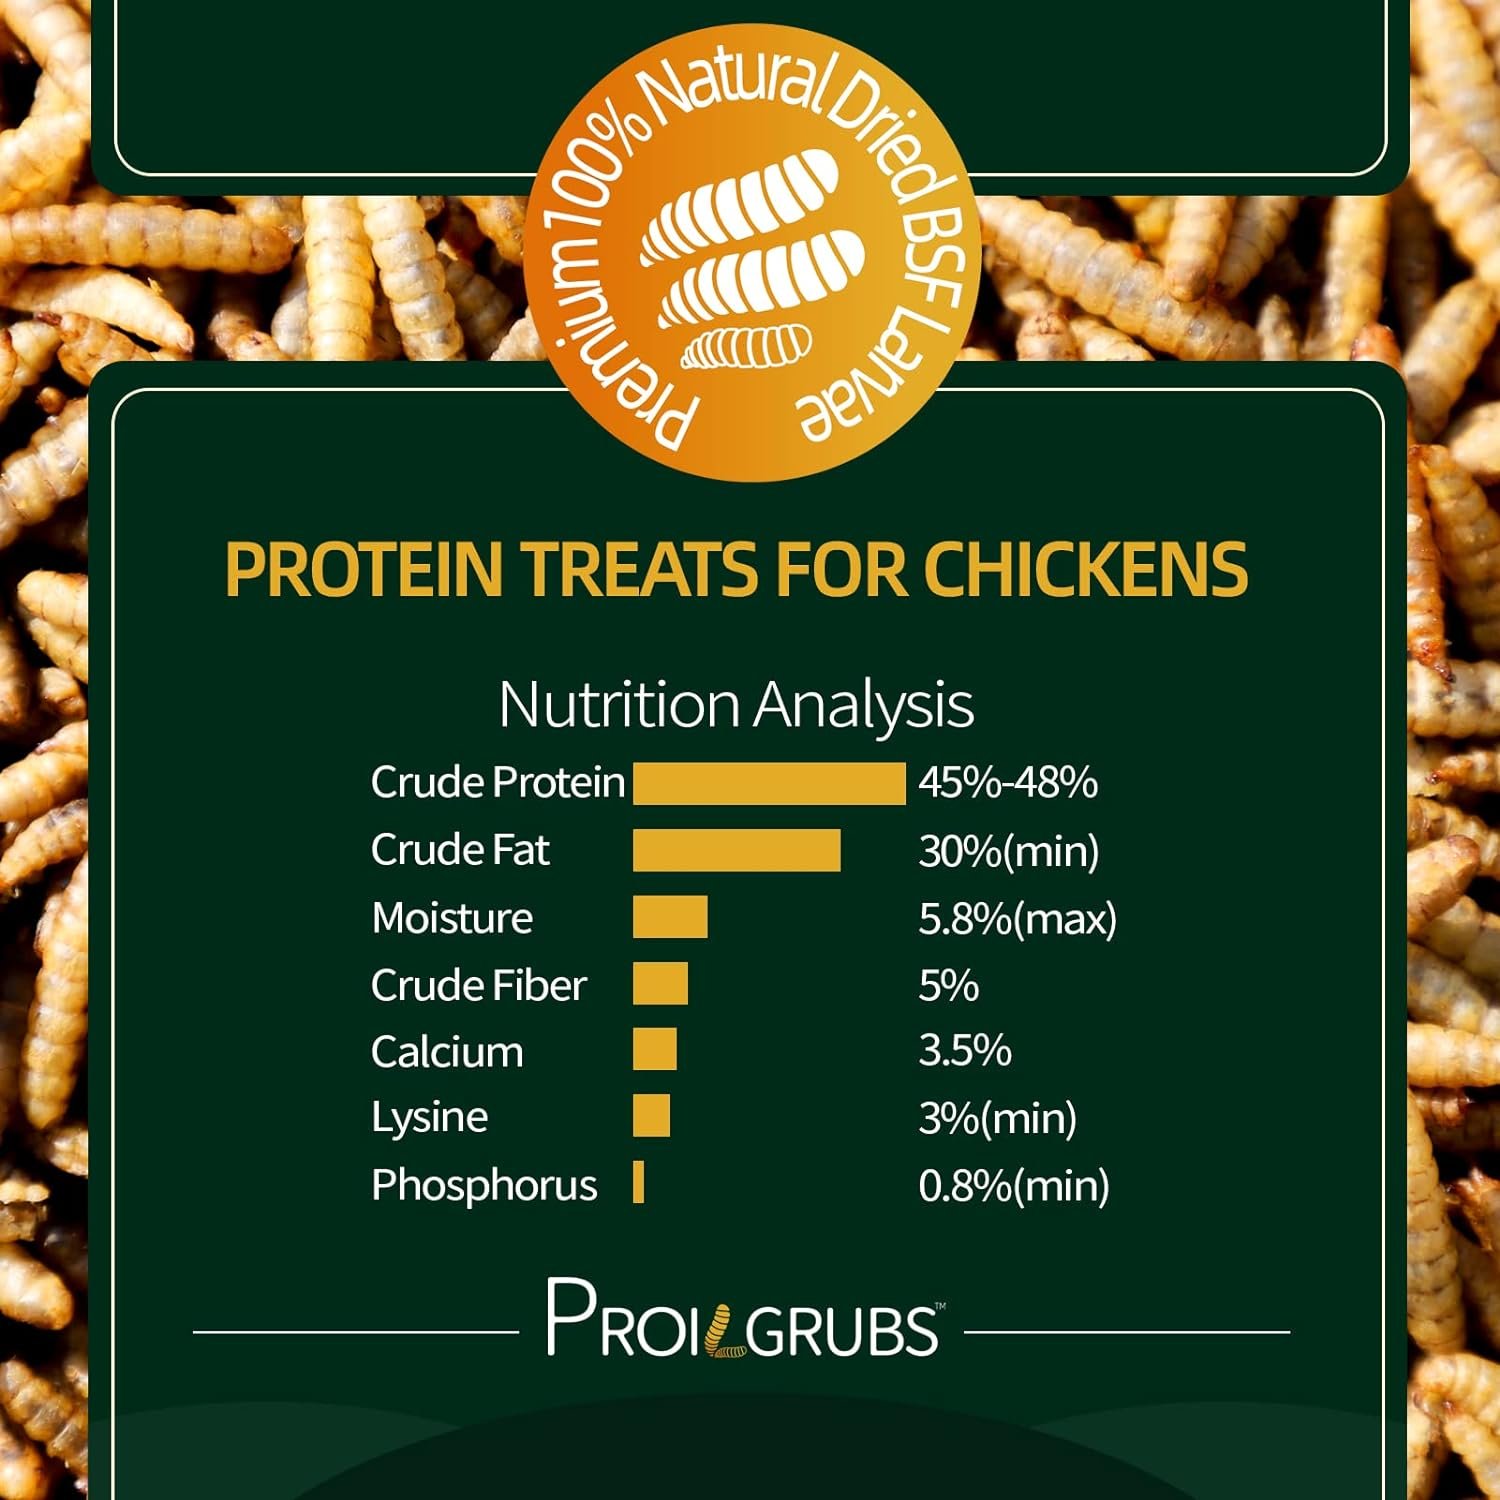 PROILGRUBS 5 LBS - Non-GMO-Dried Grubs for Chickens - 85X More Calcium Than Mealworms - All Natural Dried Black Soldier Fly Larvae Treats, Dried Meal Worms for Chickens, Hens, Birds